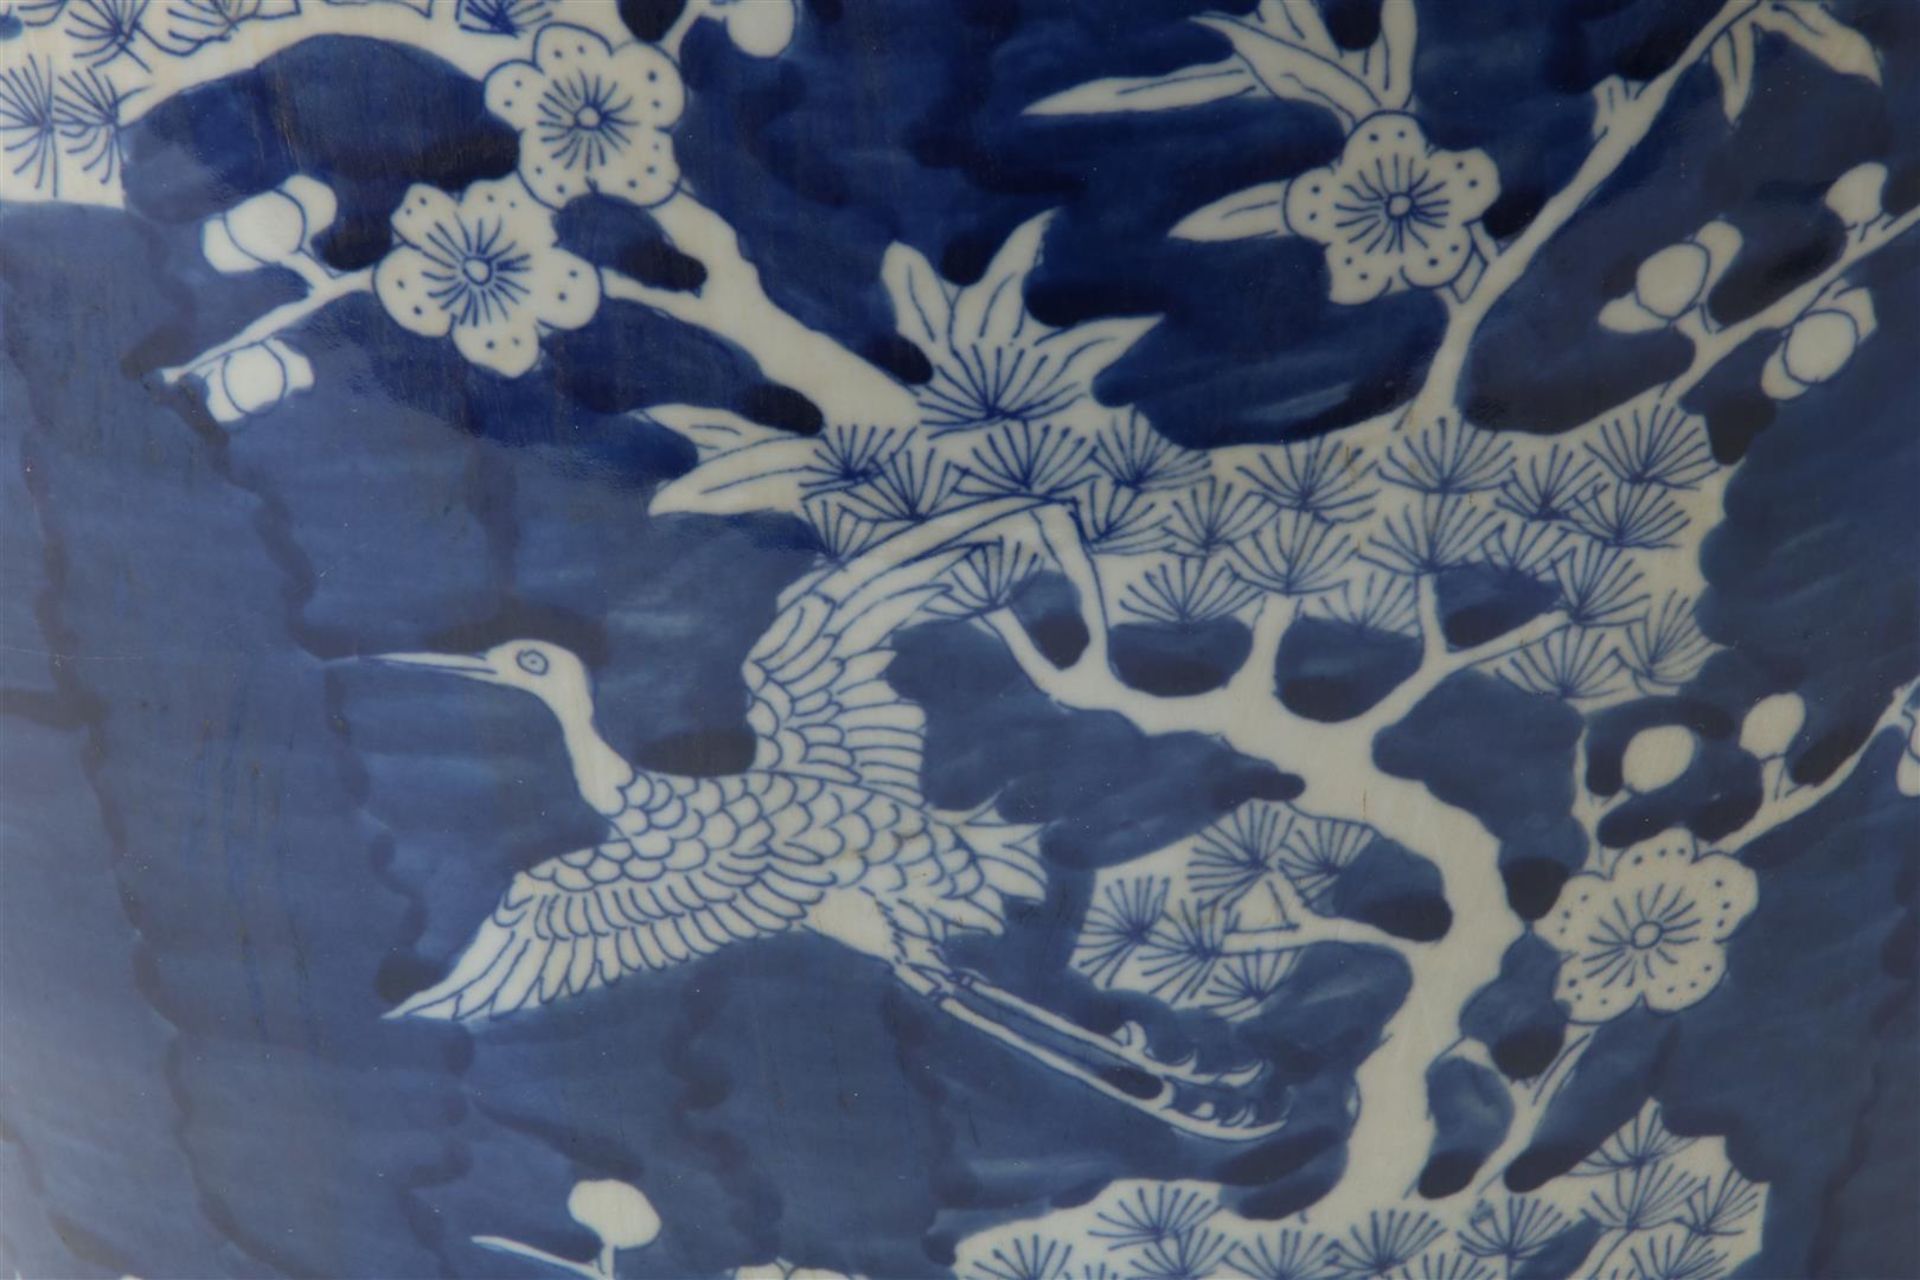 Blue and white porcelain lidded vase decorated with blossom branches and cranes, China 20th century, - Image 4 of 5